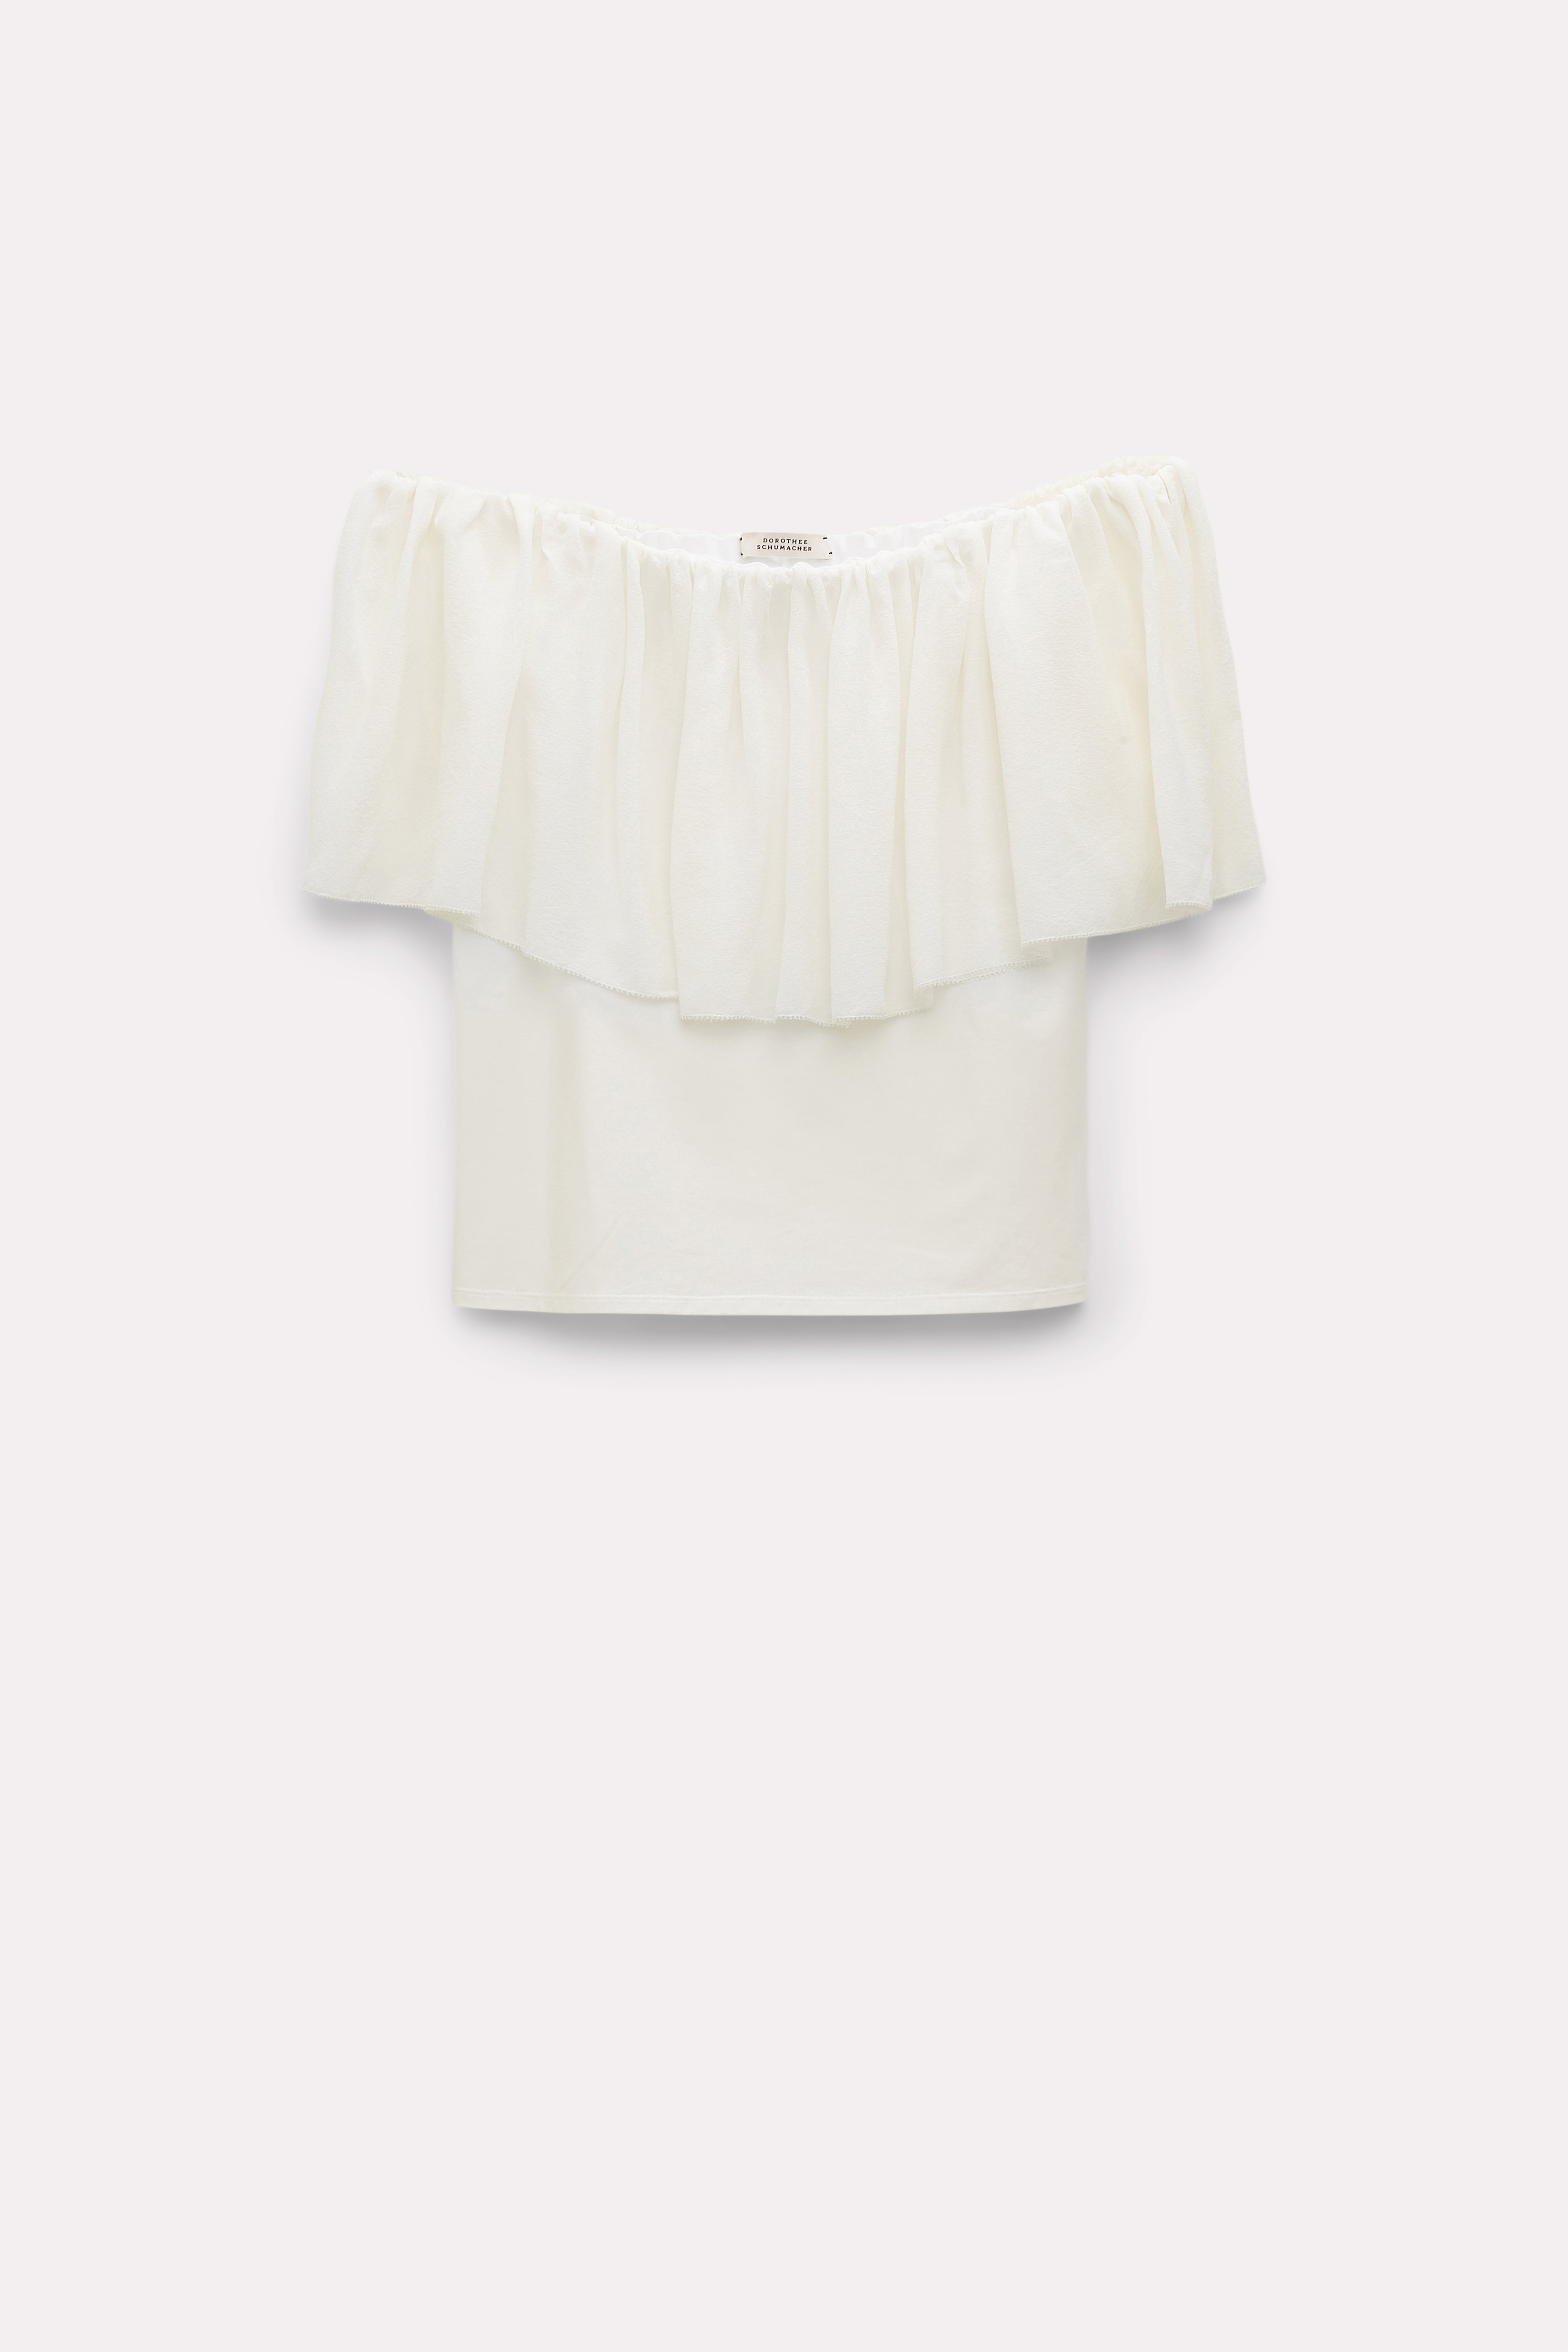 Dorothee-Schumacher-OUTLET-SALE-COOL-SOFTNESS-top-Shirts-ARCHIVE-COLLECTION.jpg